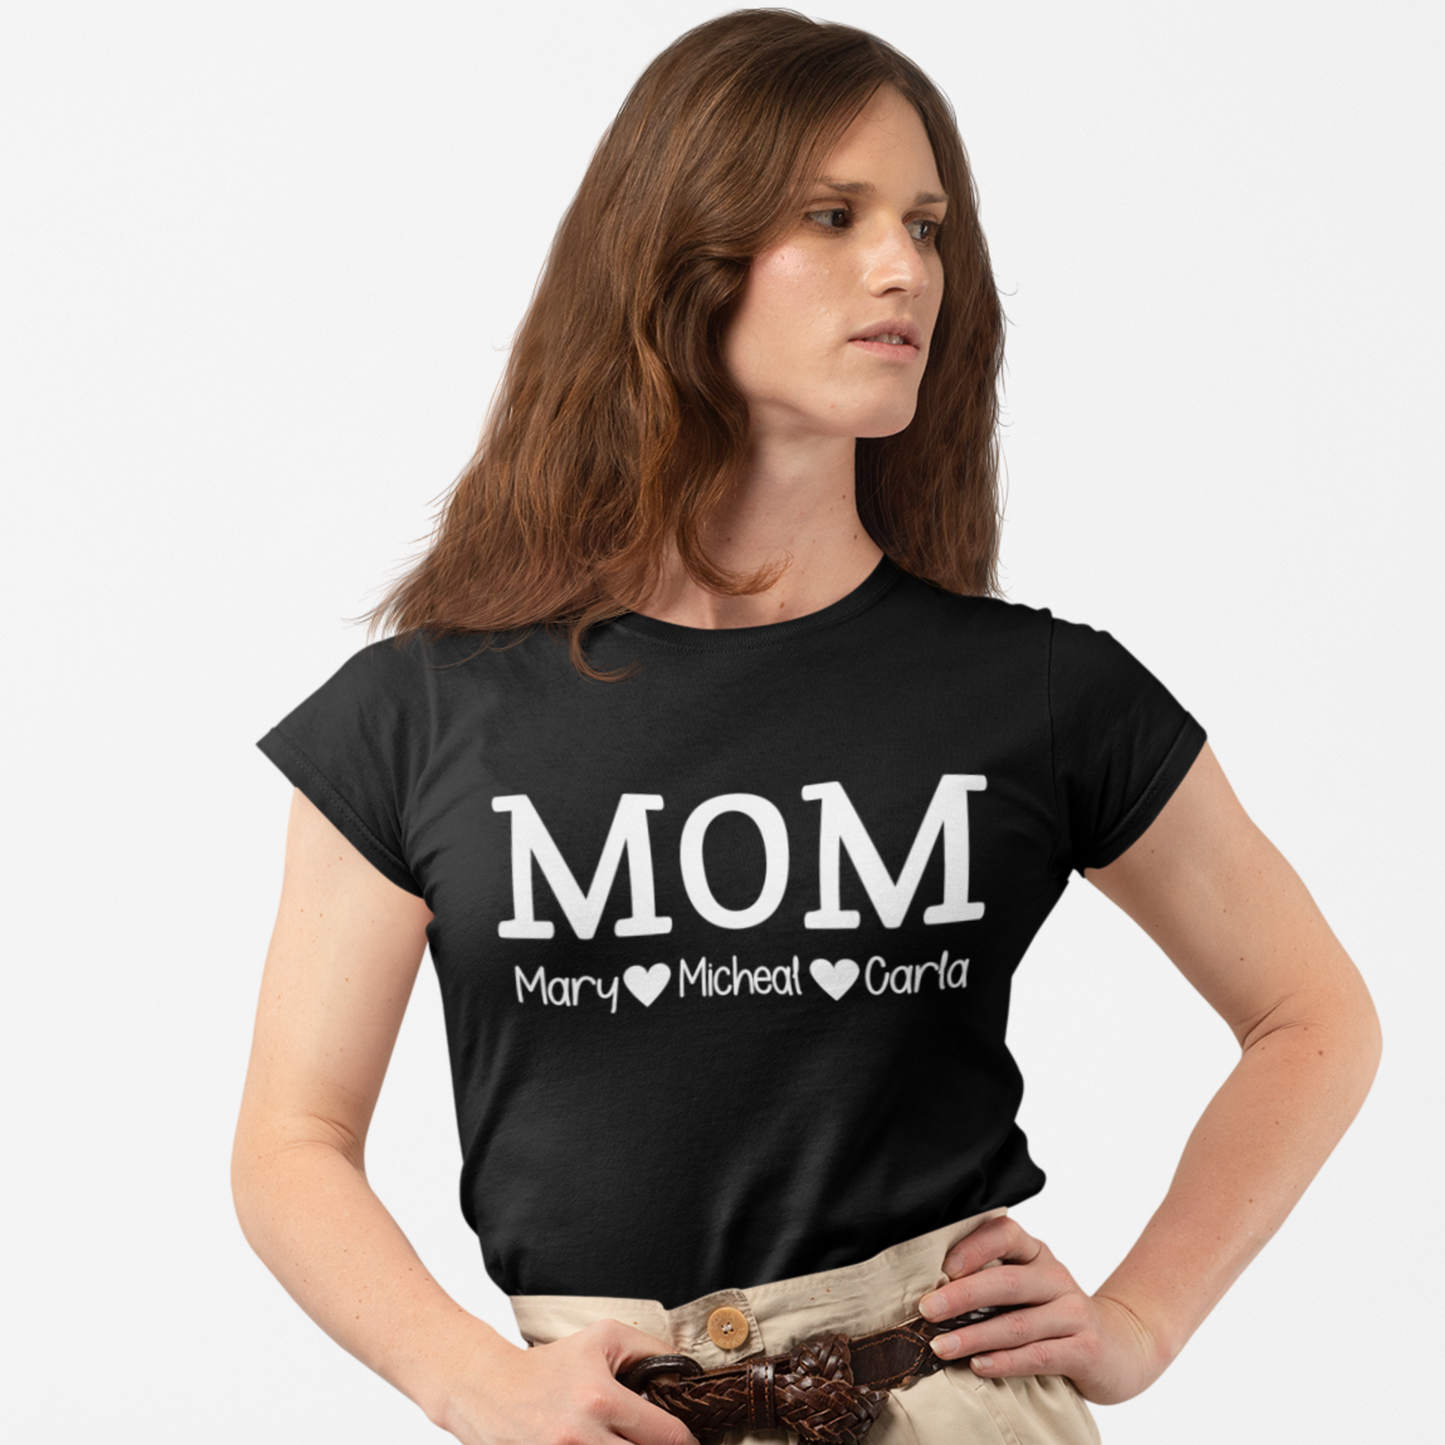 Personalized Mom Shirt With Kids Name, Personalized Mother's Day Gift, Custom Gift For Mom, Personalized Mama Tee